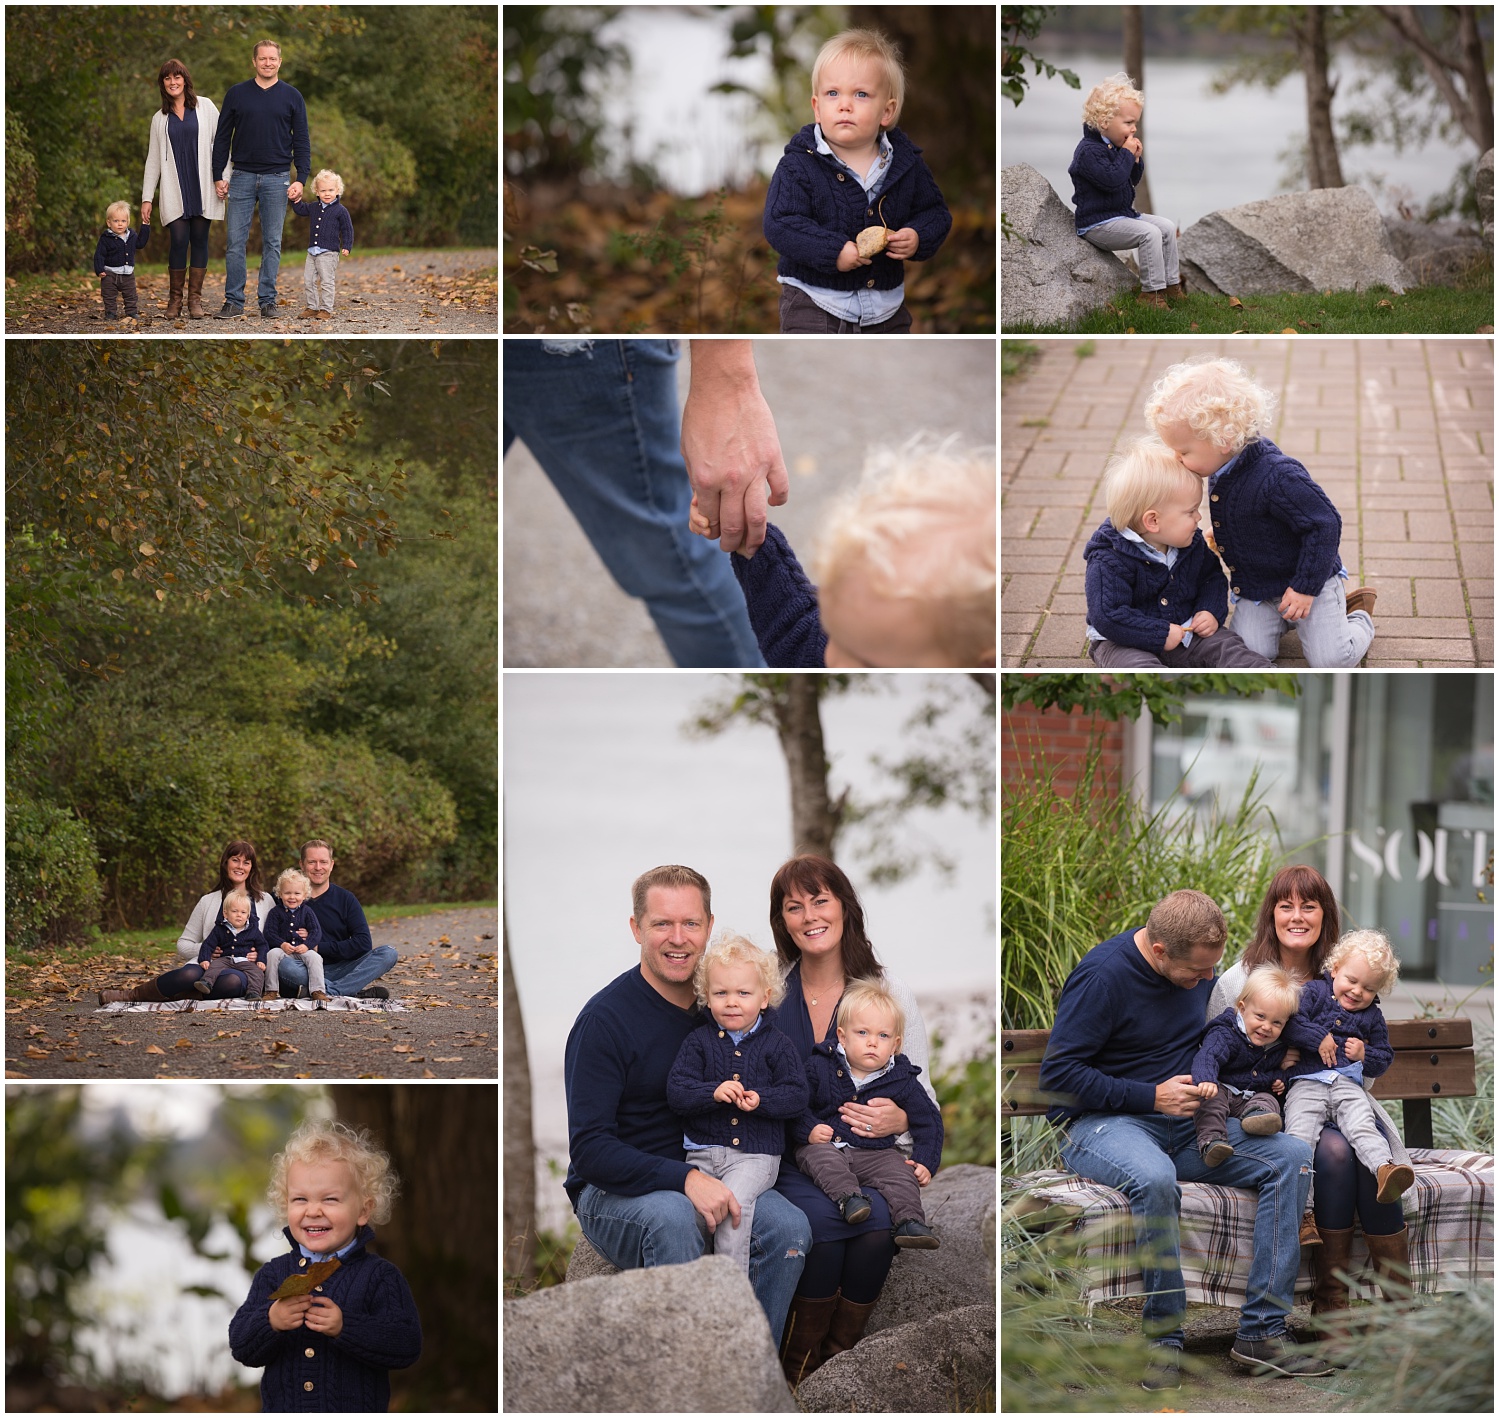 Amazing Day Photography - Fall Mini Sessions - Fall Family Photos - Langley Family Photographer (2).jpg